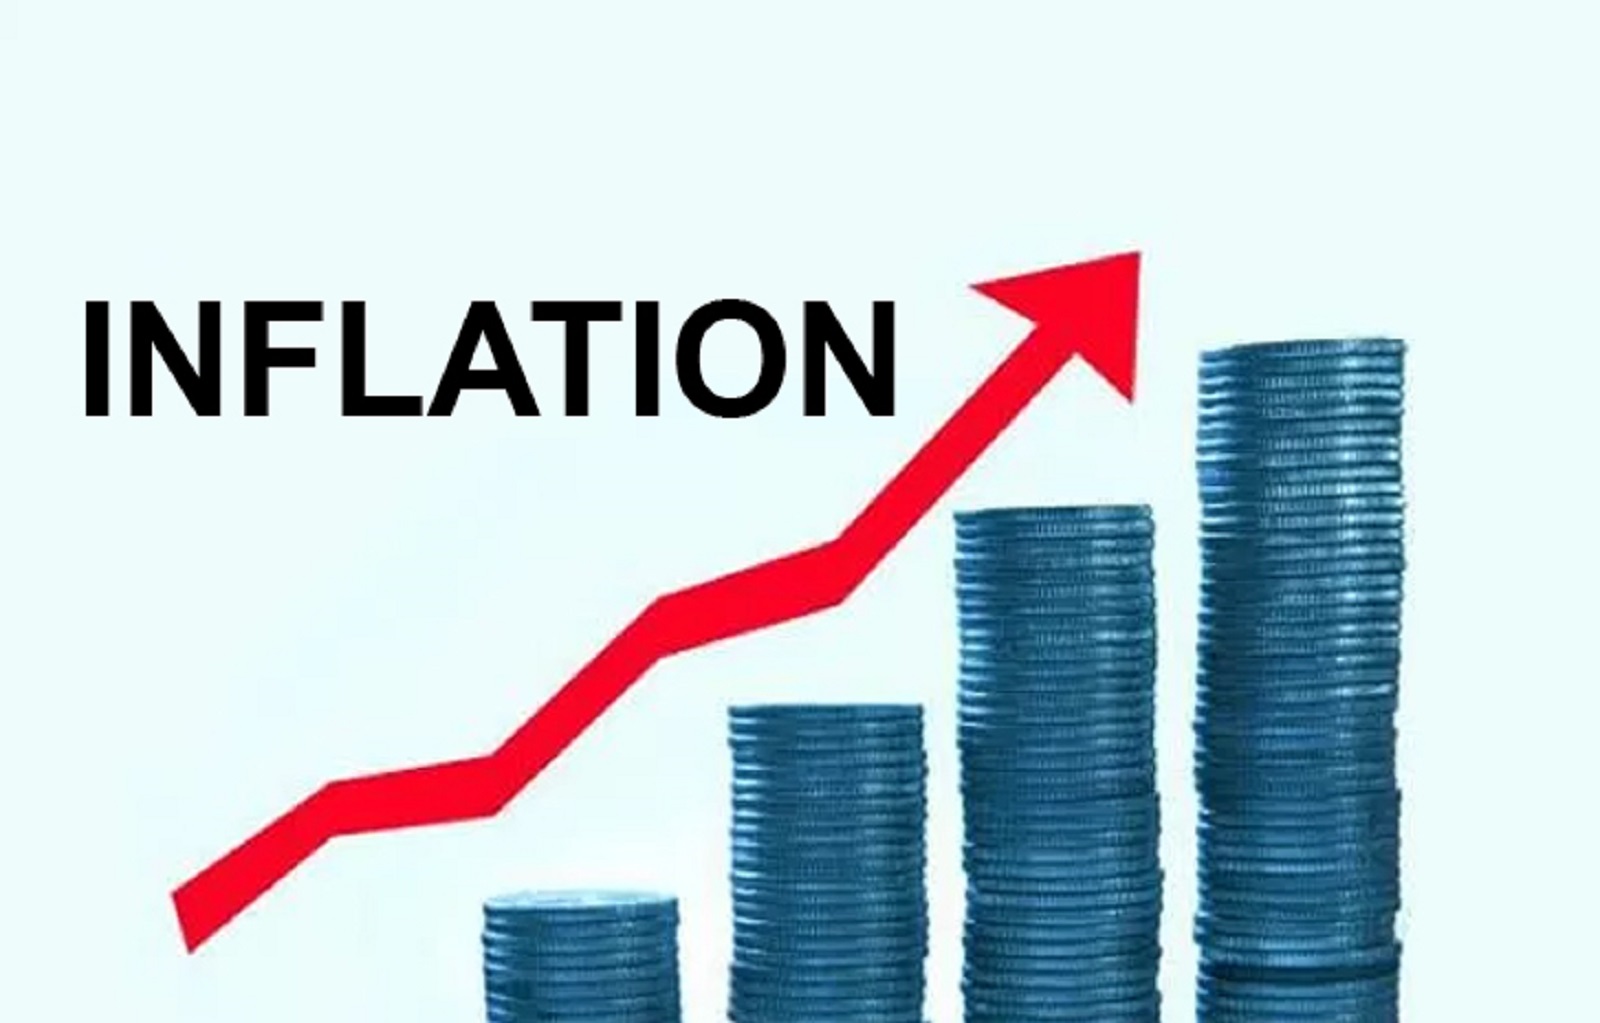 Nigeria’s inflation rate hits 19.64%